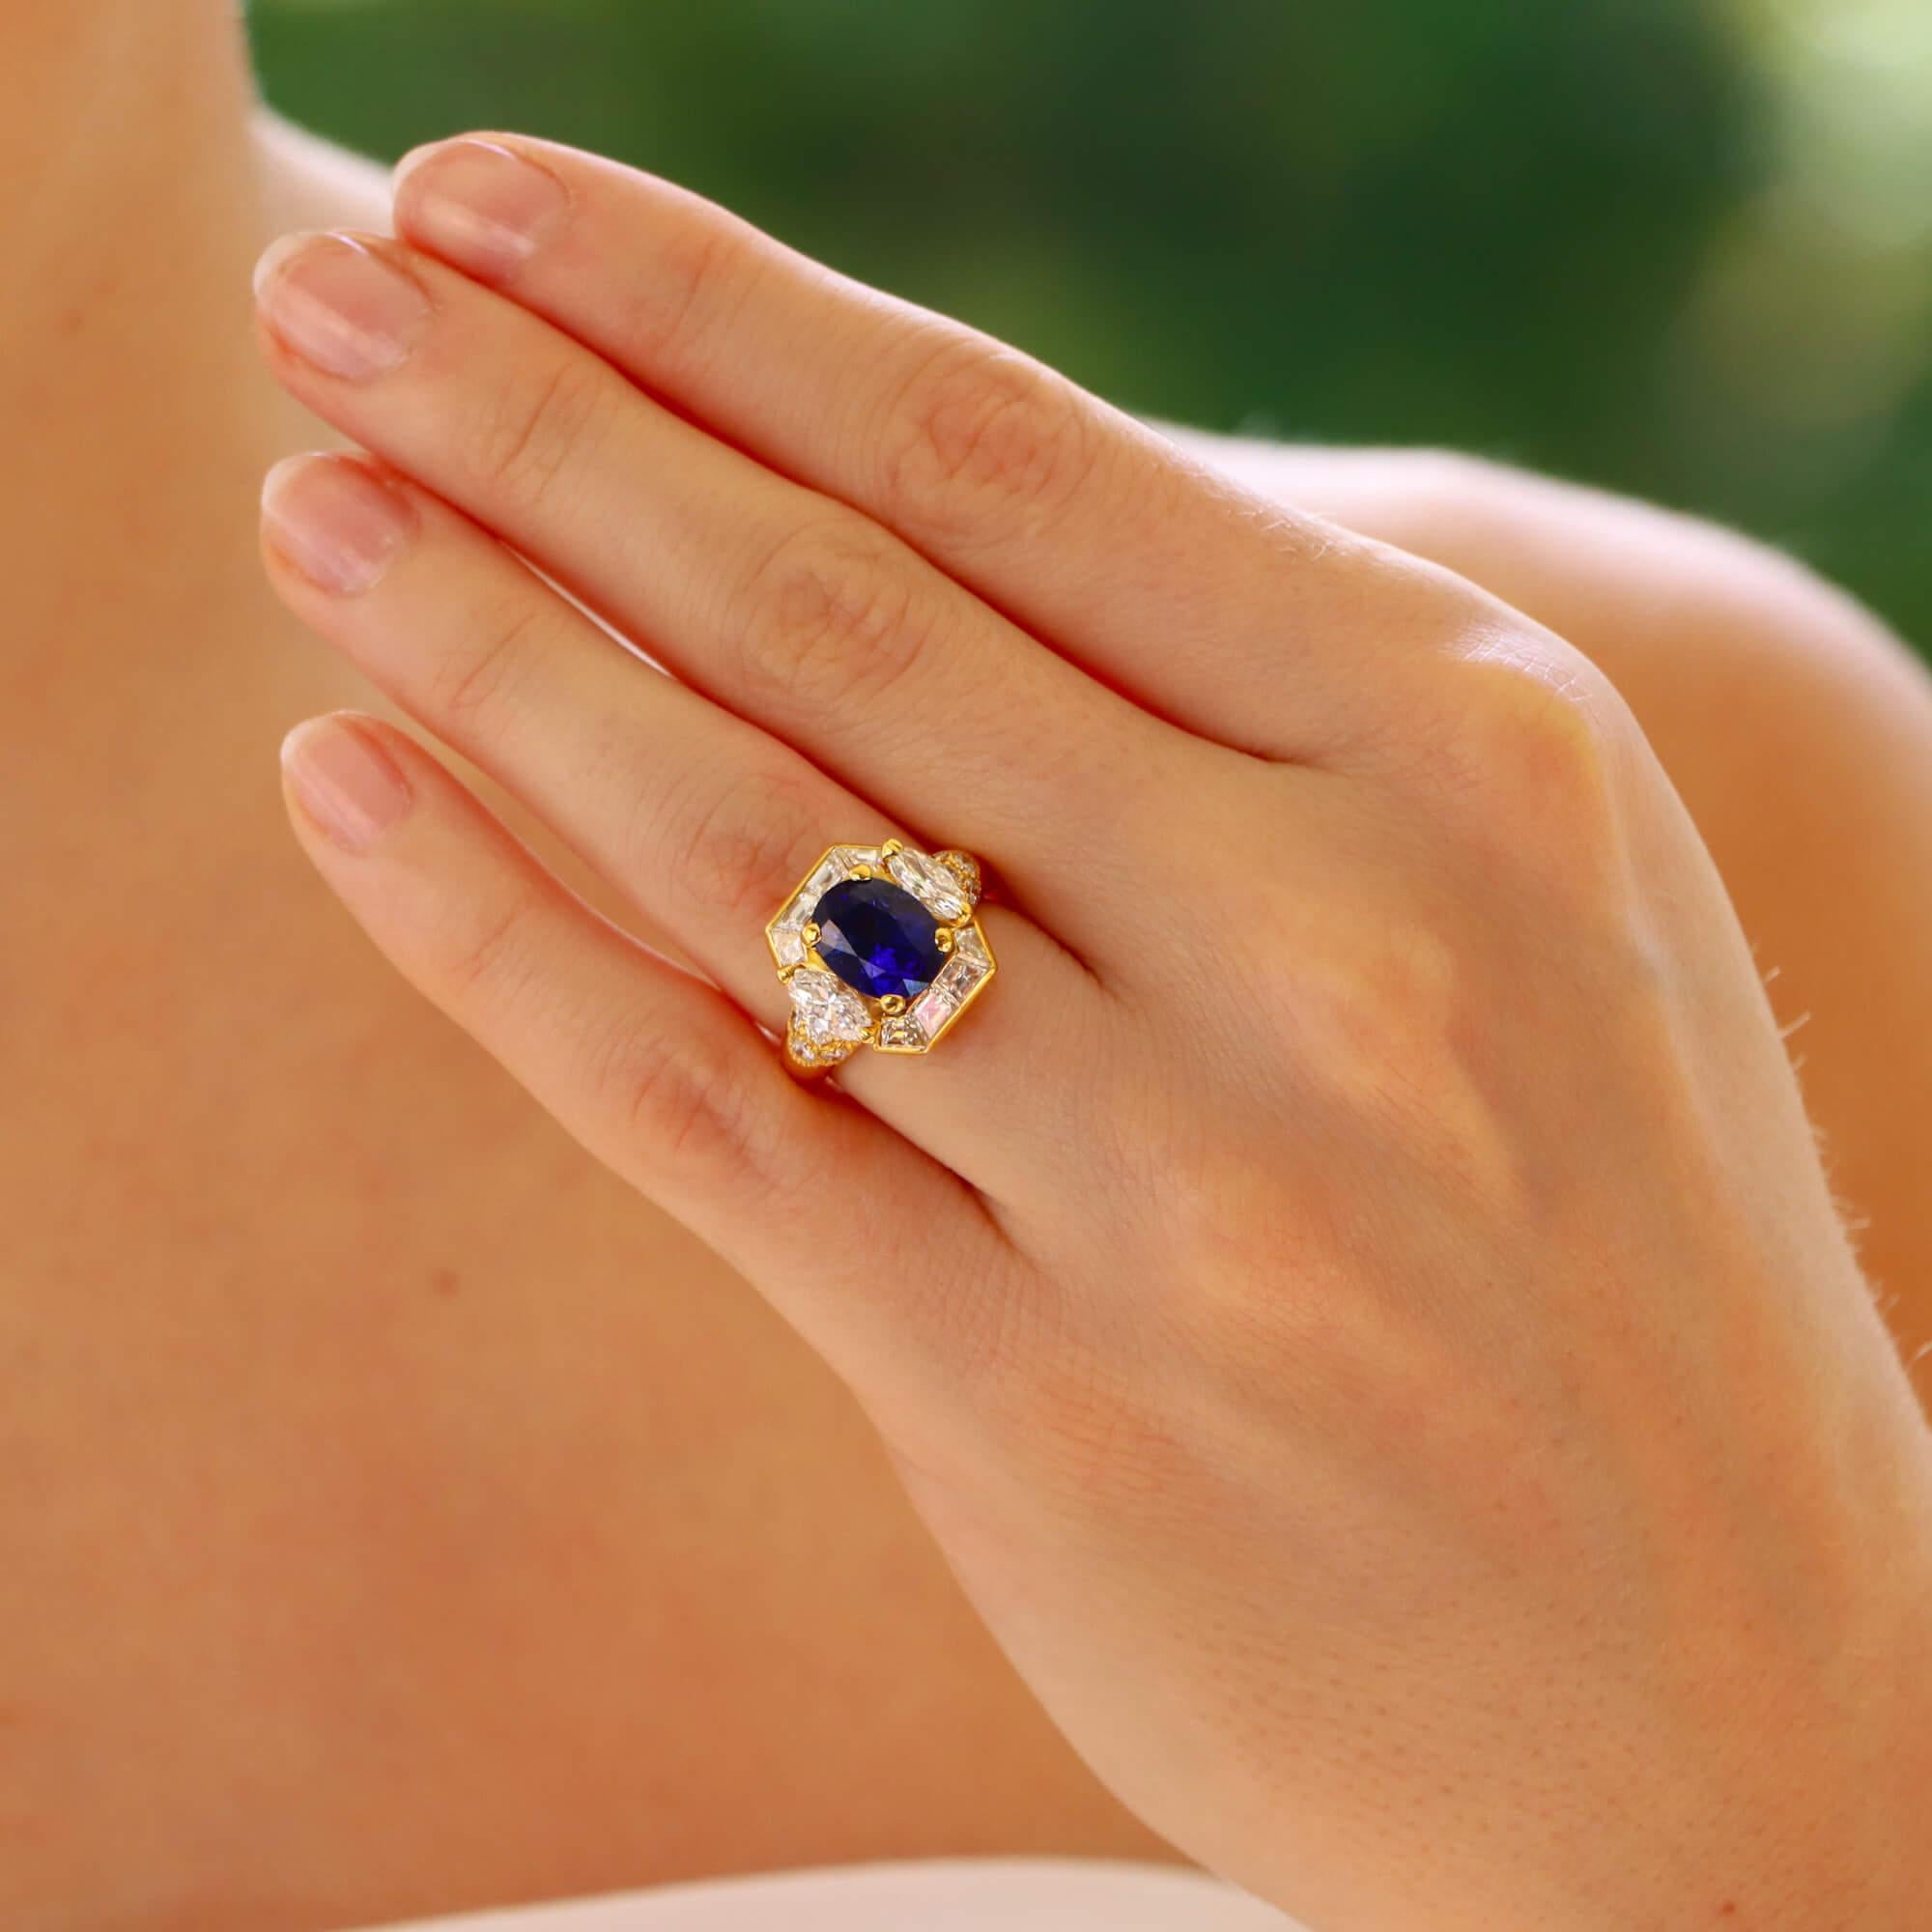 A beautiful vintage Givenchy GIA certified sapphire and diamond ring set in 18k yellow gold.

This highly unique design is centrally set with a GIA certified oval brilliant cut sapphire, described as ‘Royal Blue’ in colouring. The sapphire is